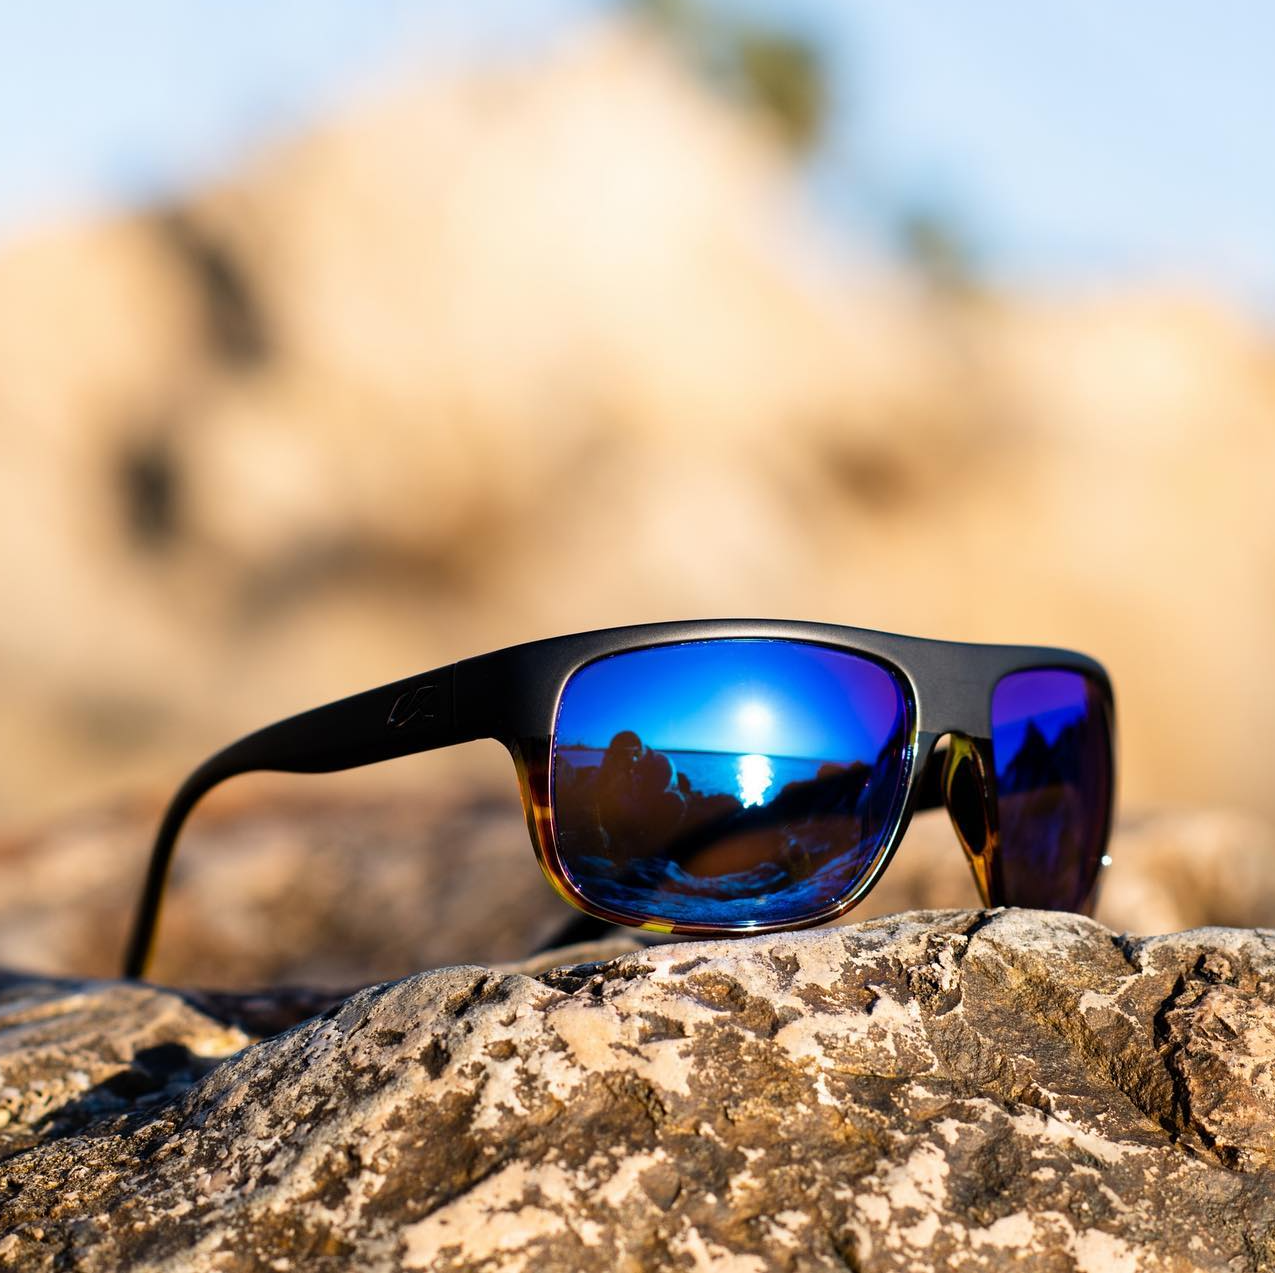 Pair of Kaenon wraparound sunglasses in tortoise with blue mirror glasses sitting on a rock